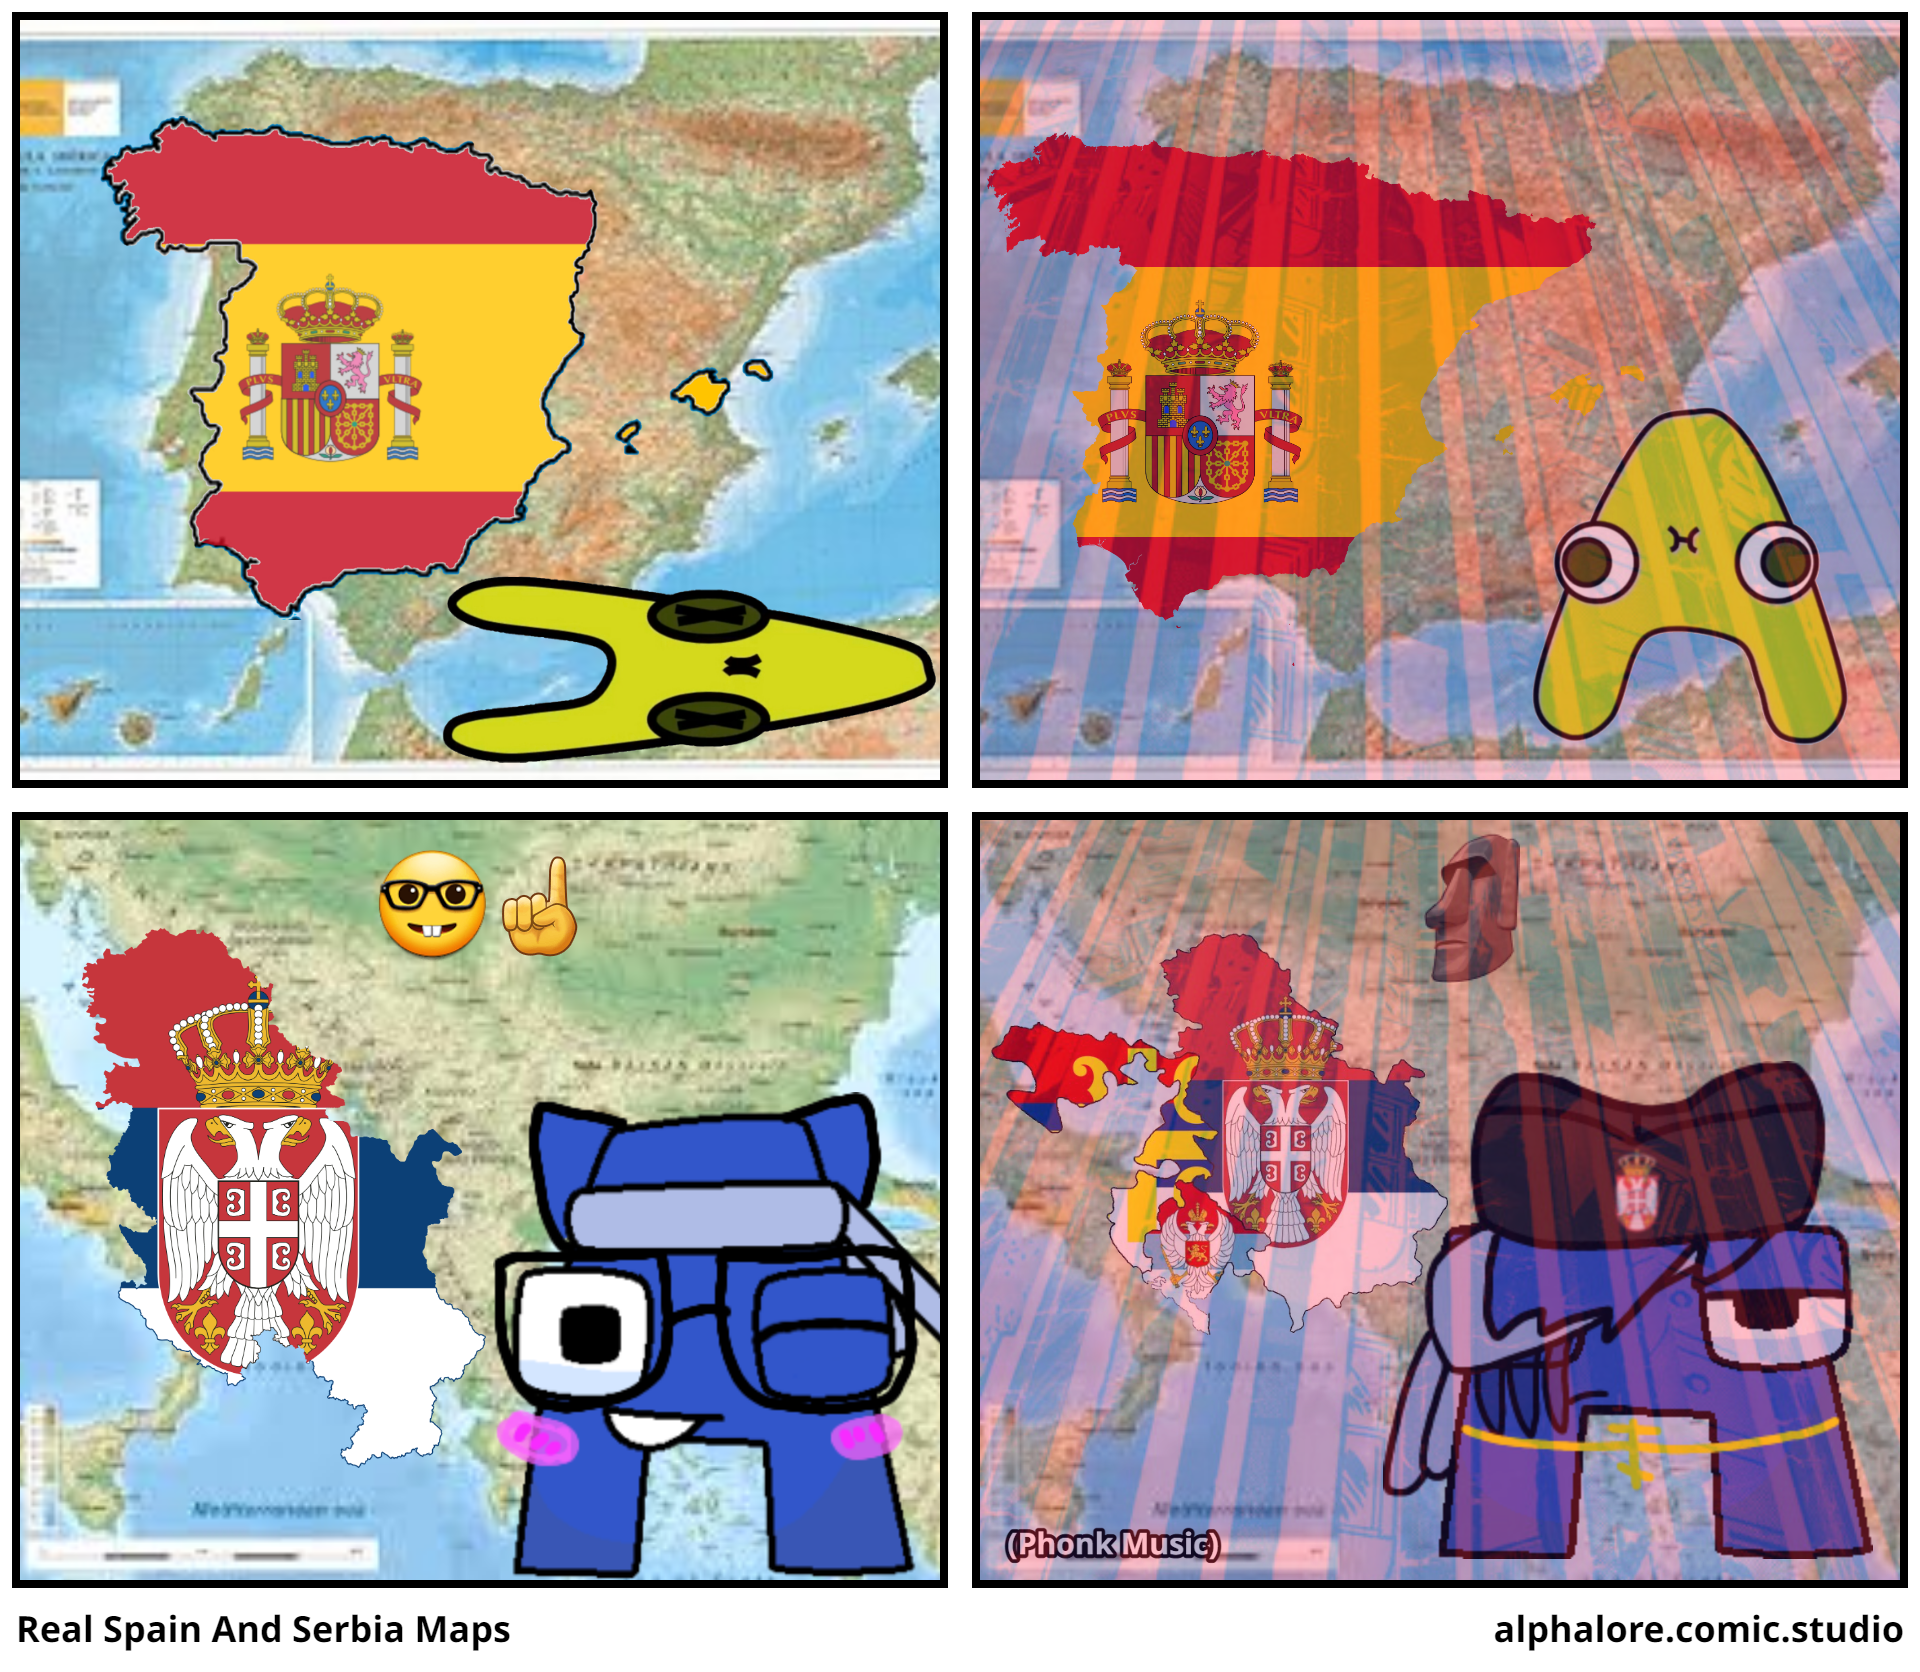 Real Spain And Serbia Maps